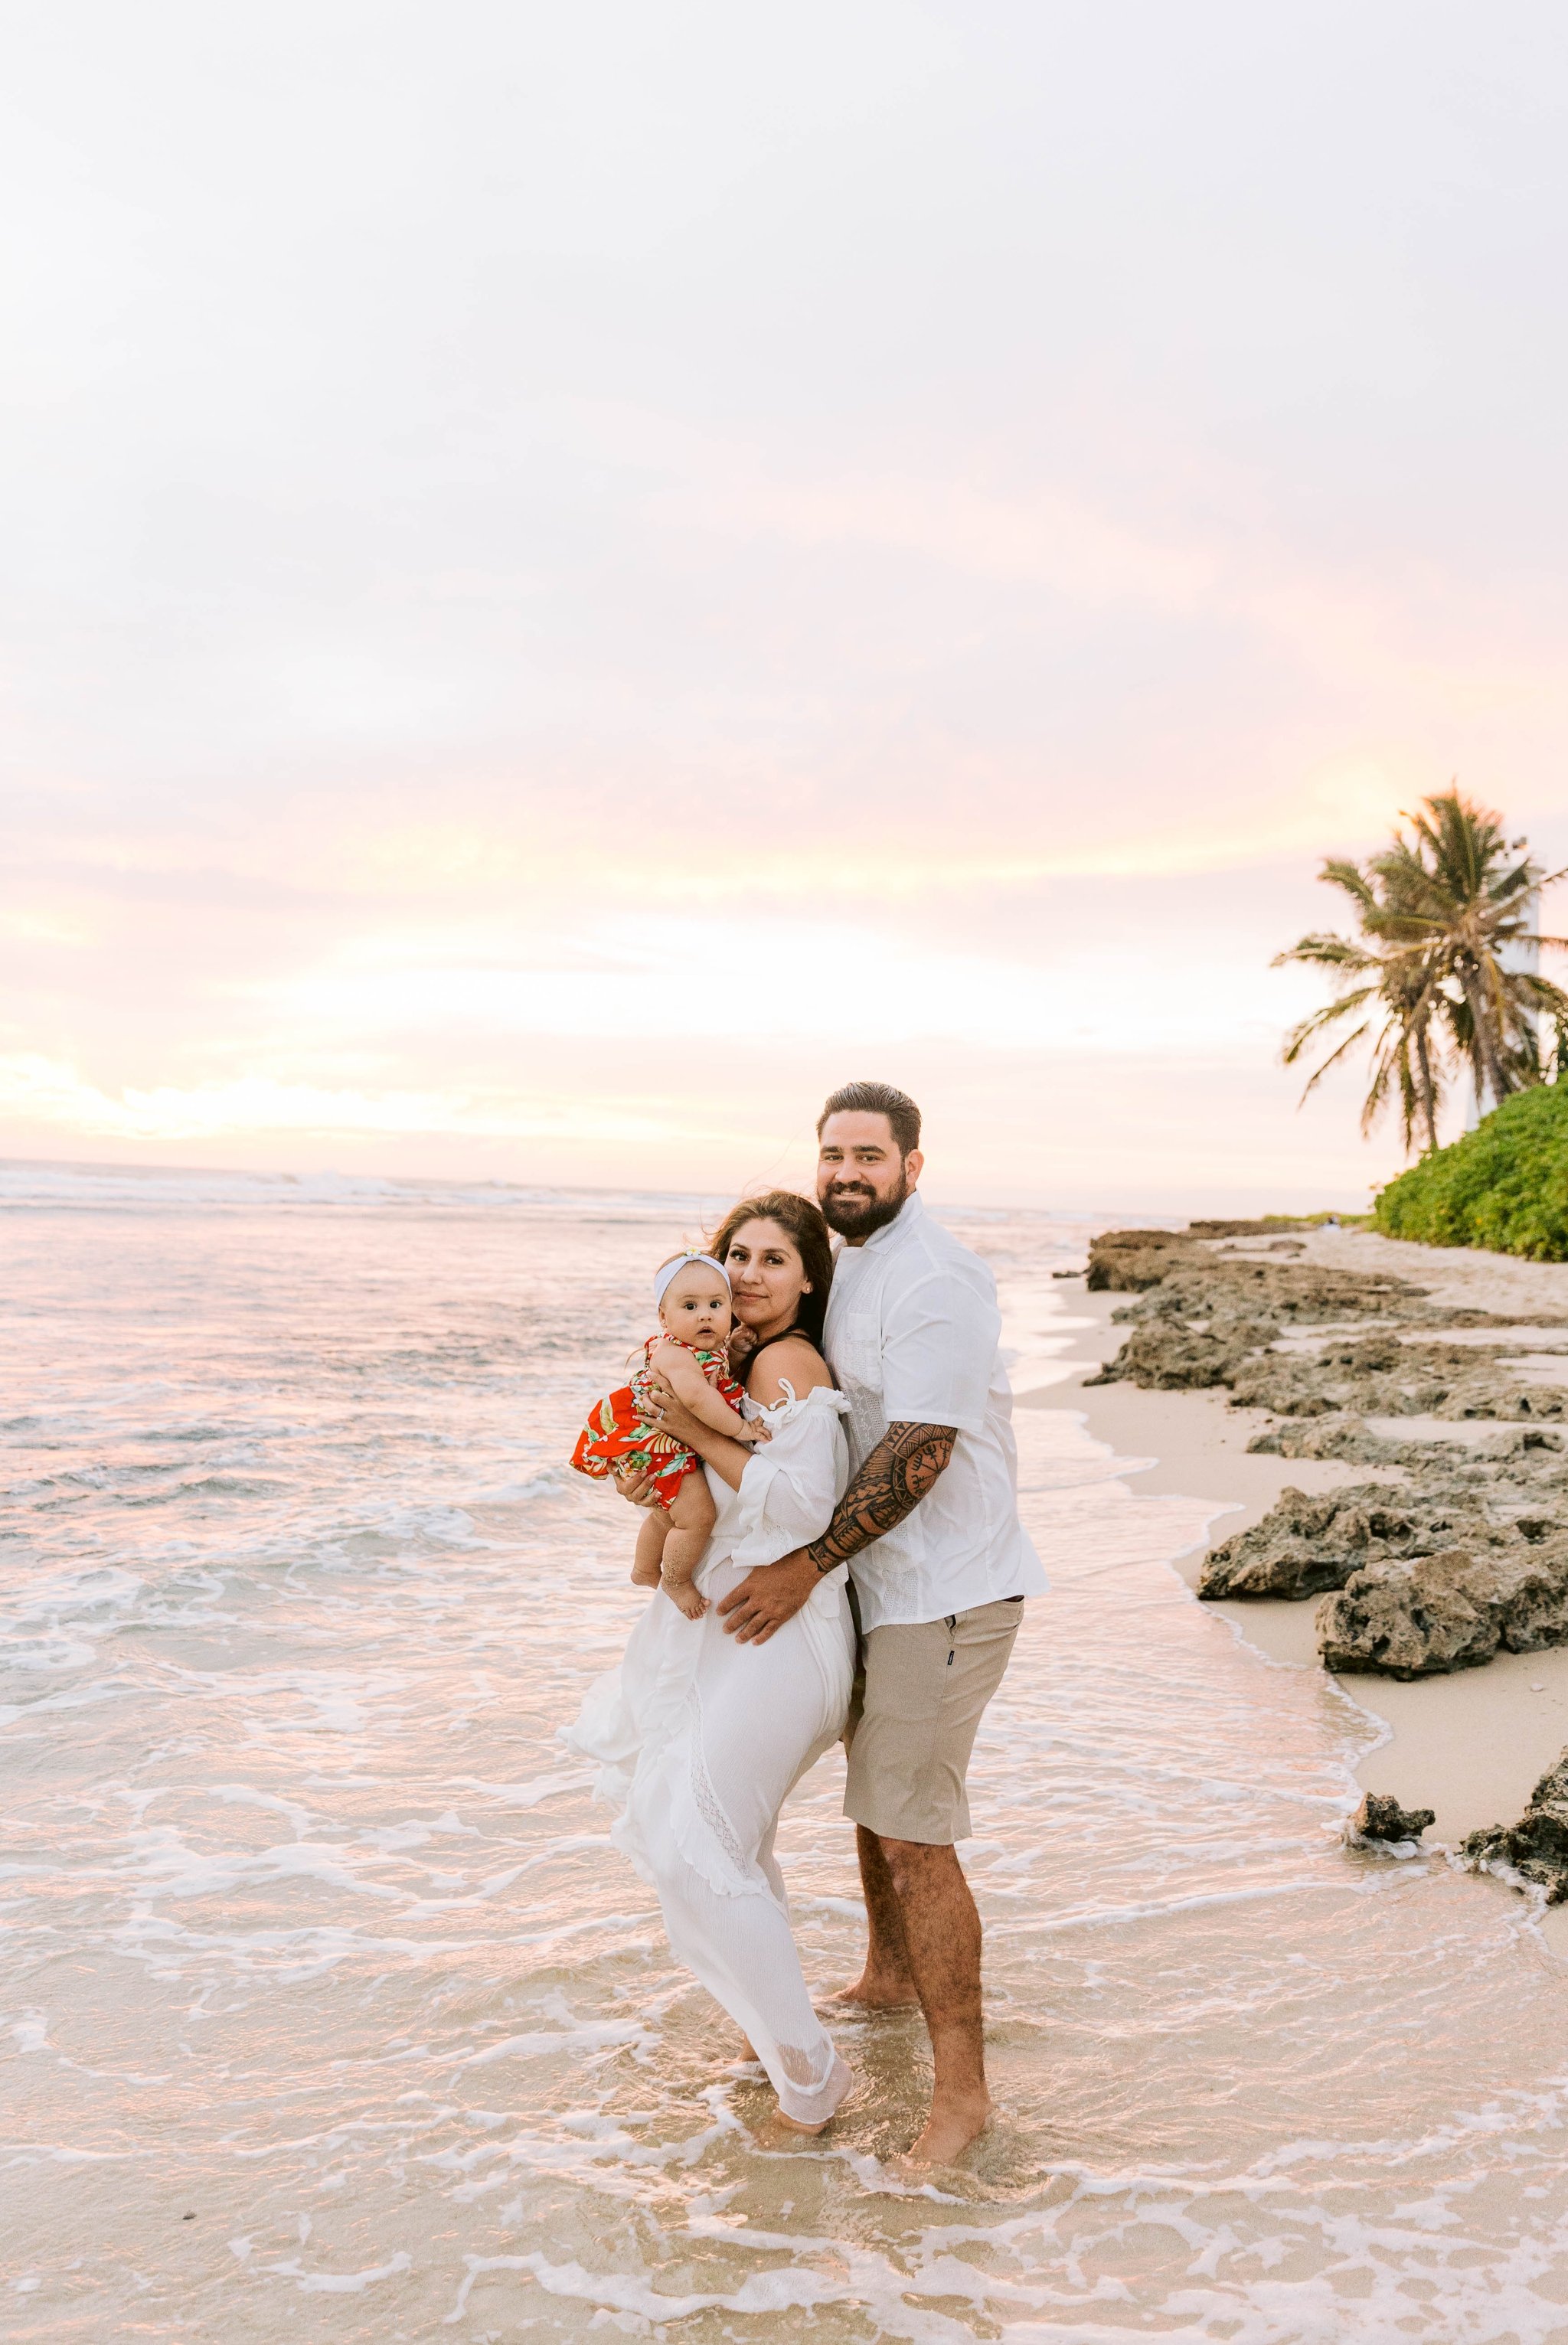 Sunset Family Photography Session at Barbers Point Beach Park, Oahu Hawaii